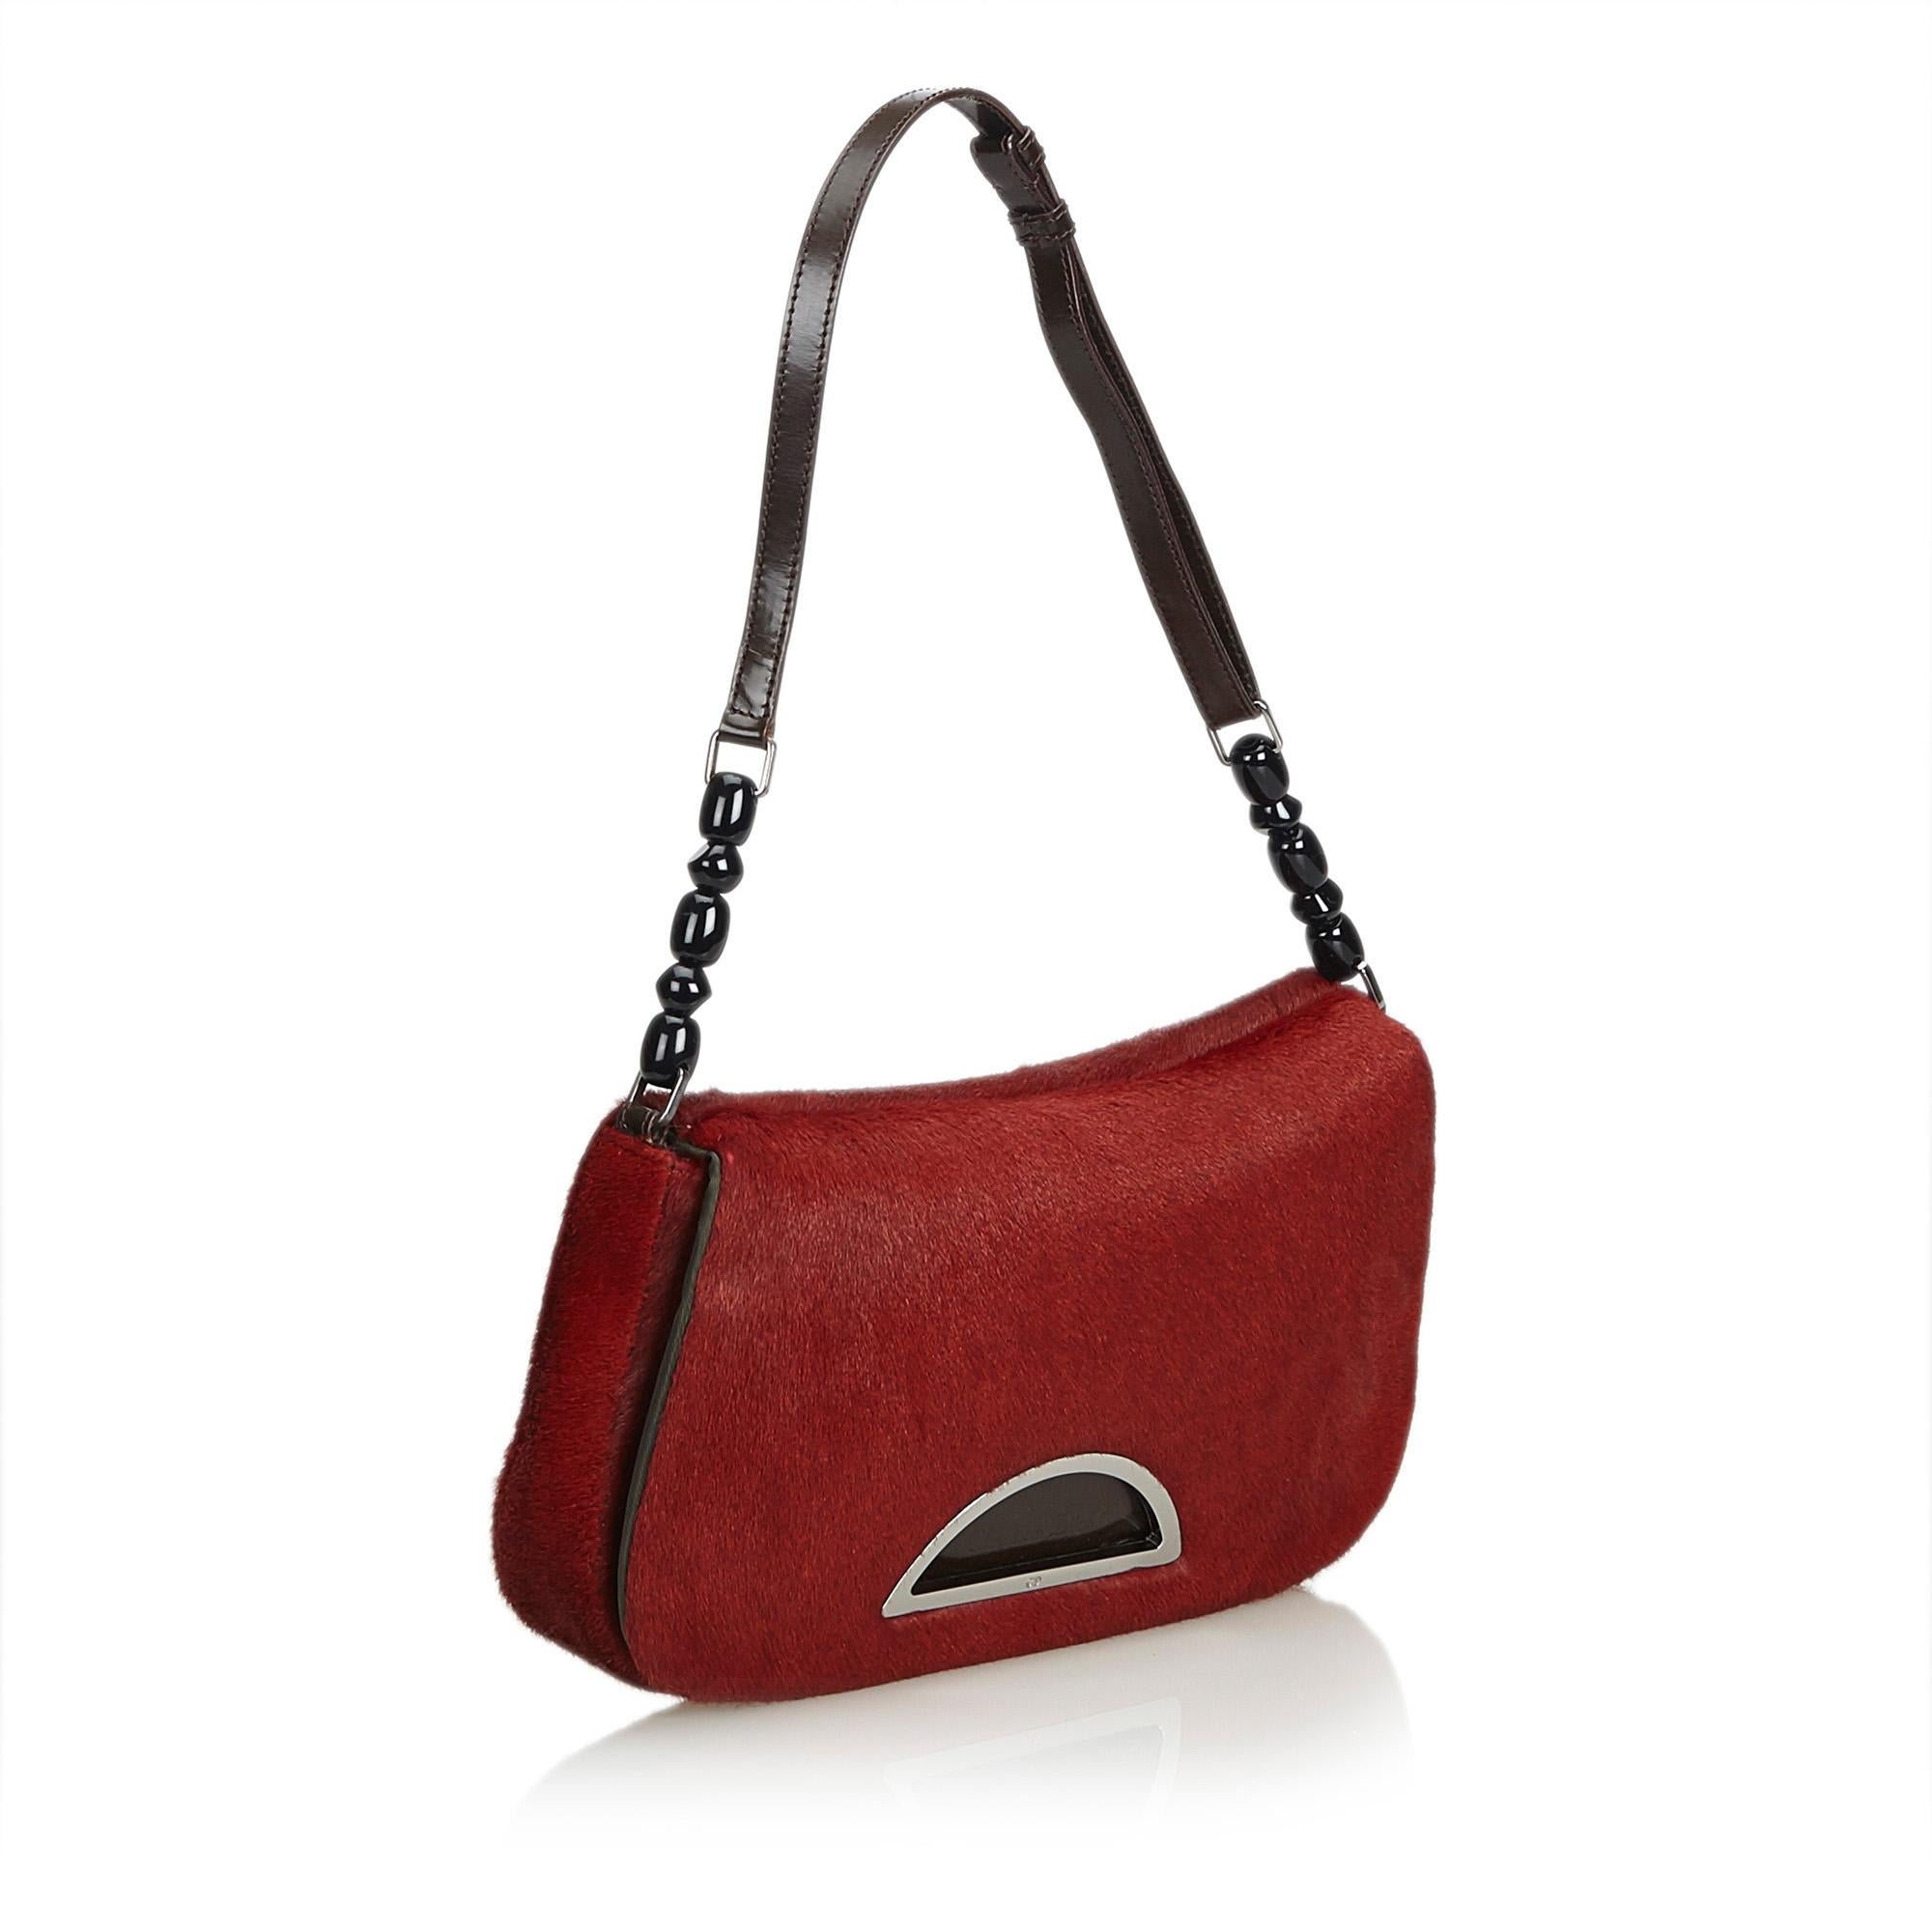 The Malice features a pony hair body, a leather shoulder strap, a front flap, and an interior zip pocket. It carries as B+ condition rating.

Inclusions: 
Dust Bag

Dimensions:
Length: 14.00 cm
Width: 26.00 cm
Depth: 4.00 cm
Shoulder Drop: 21.00